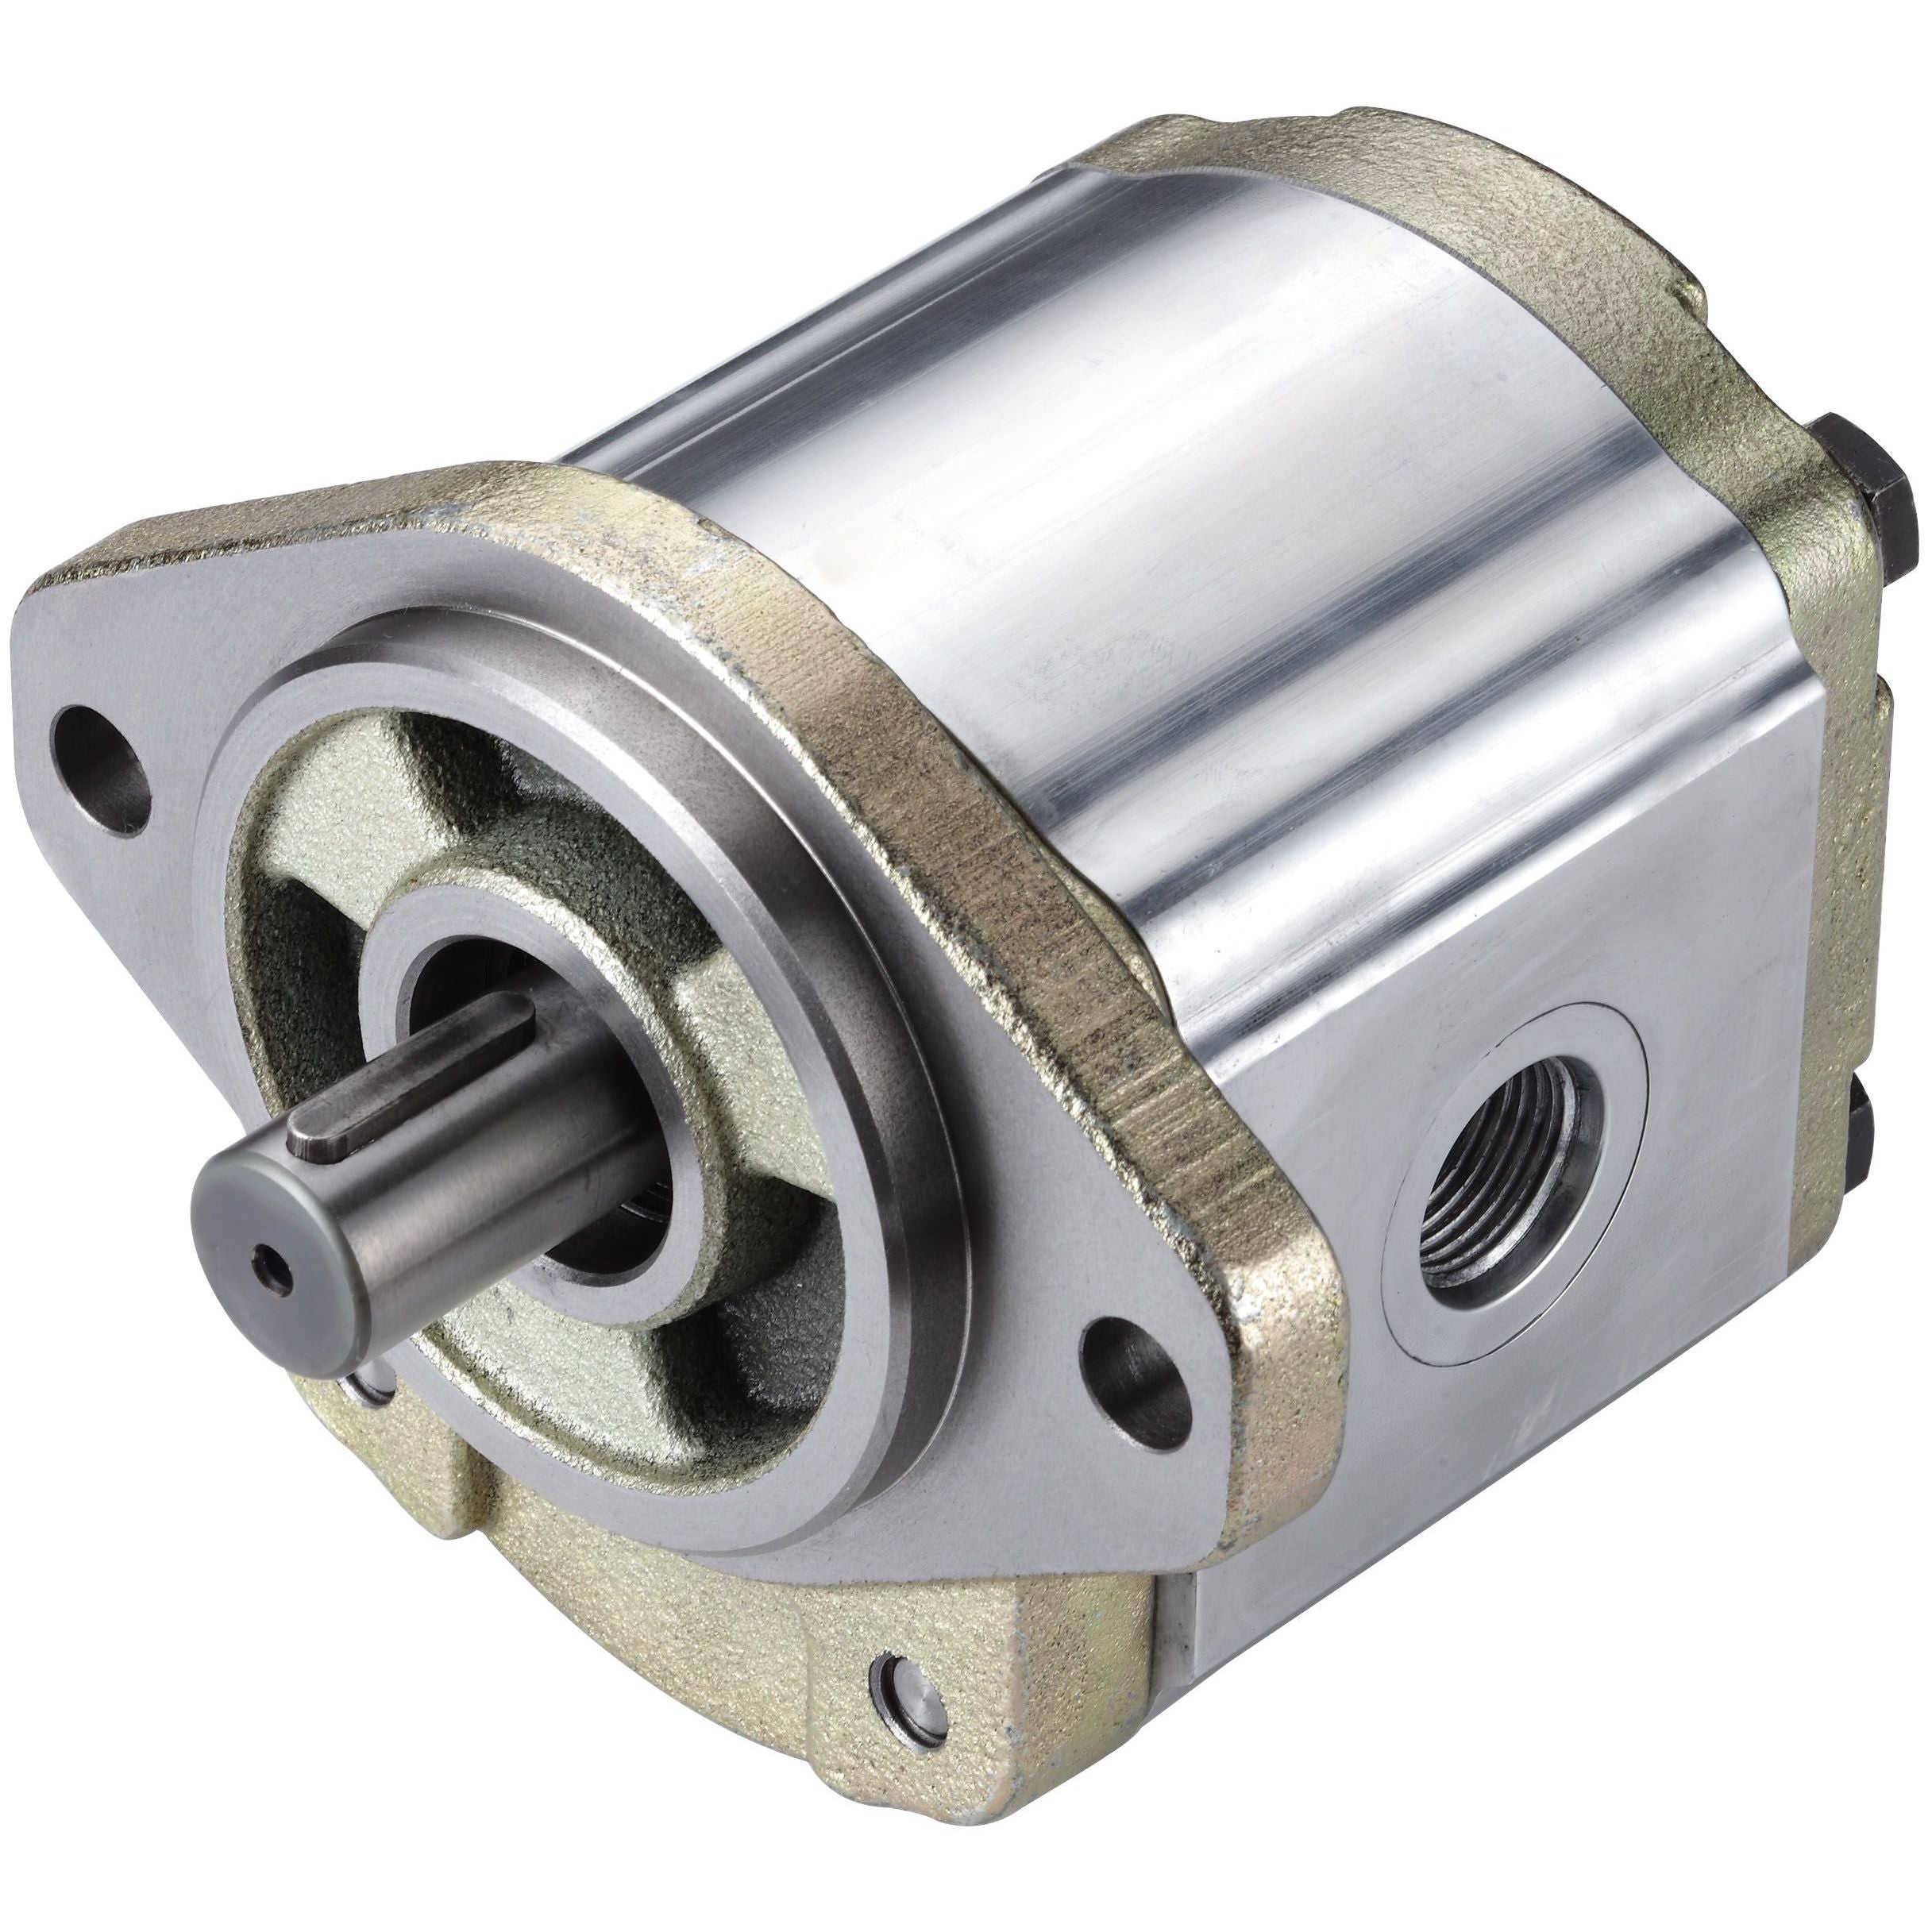 3GB8ZU225R : Honor Gear Pump, CW Rotation, 25cc (1.53in3), 11.89 GPM, 3500psi, 3000 RPM, #20 SAE (1.25") In, #12 SAE (3/4") Out, Splined Shaft 13-Tooth, 16/32 Pitch, SAE B 2-Bolt Mount